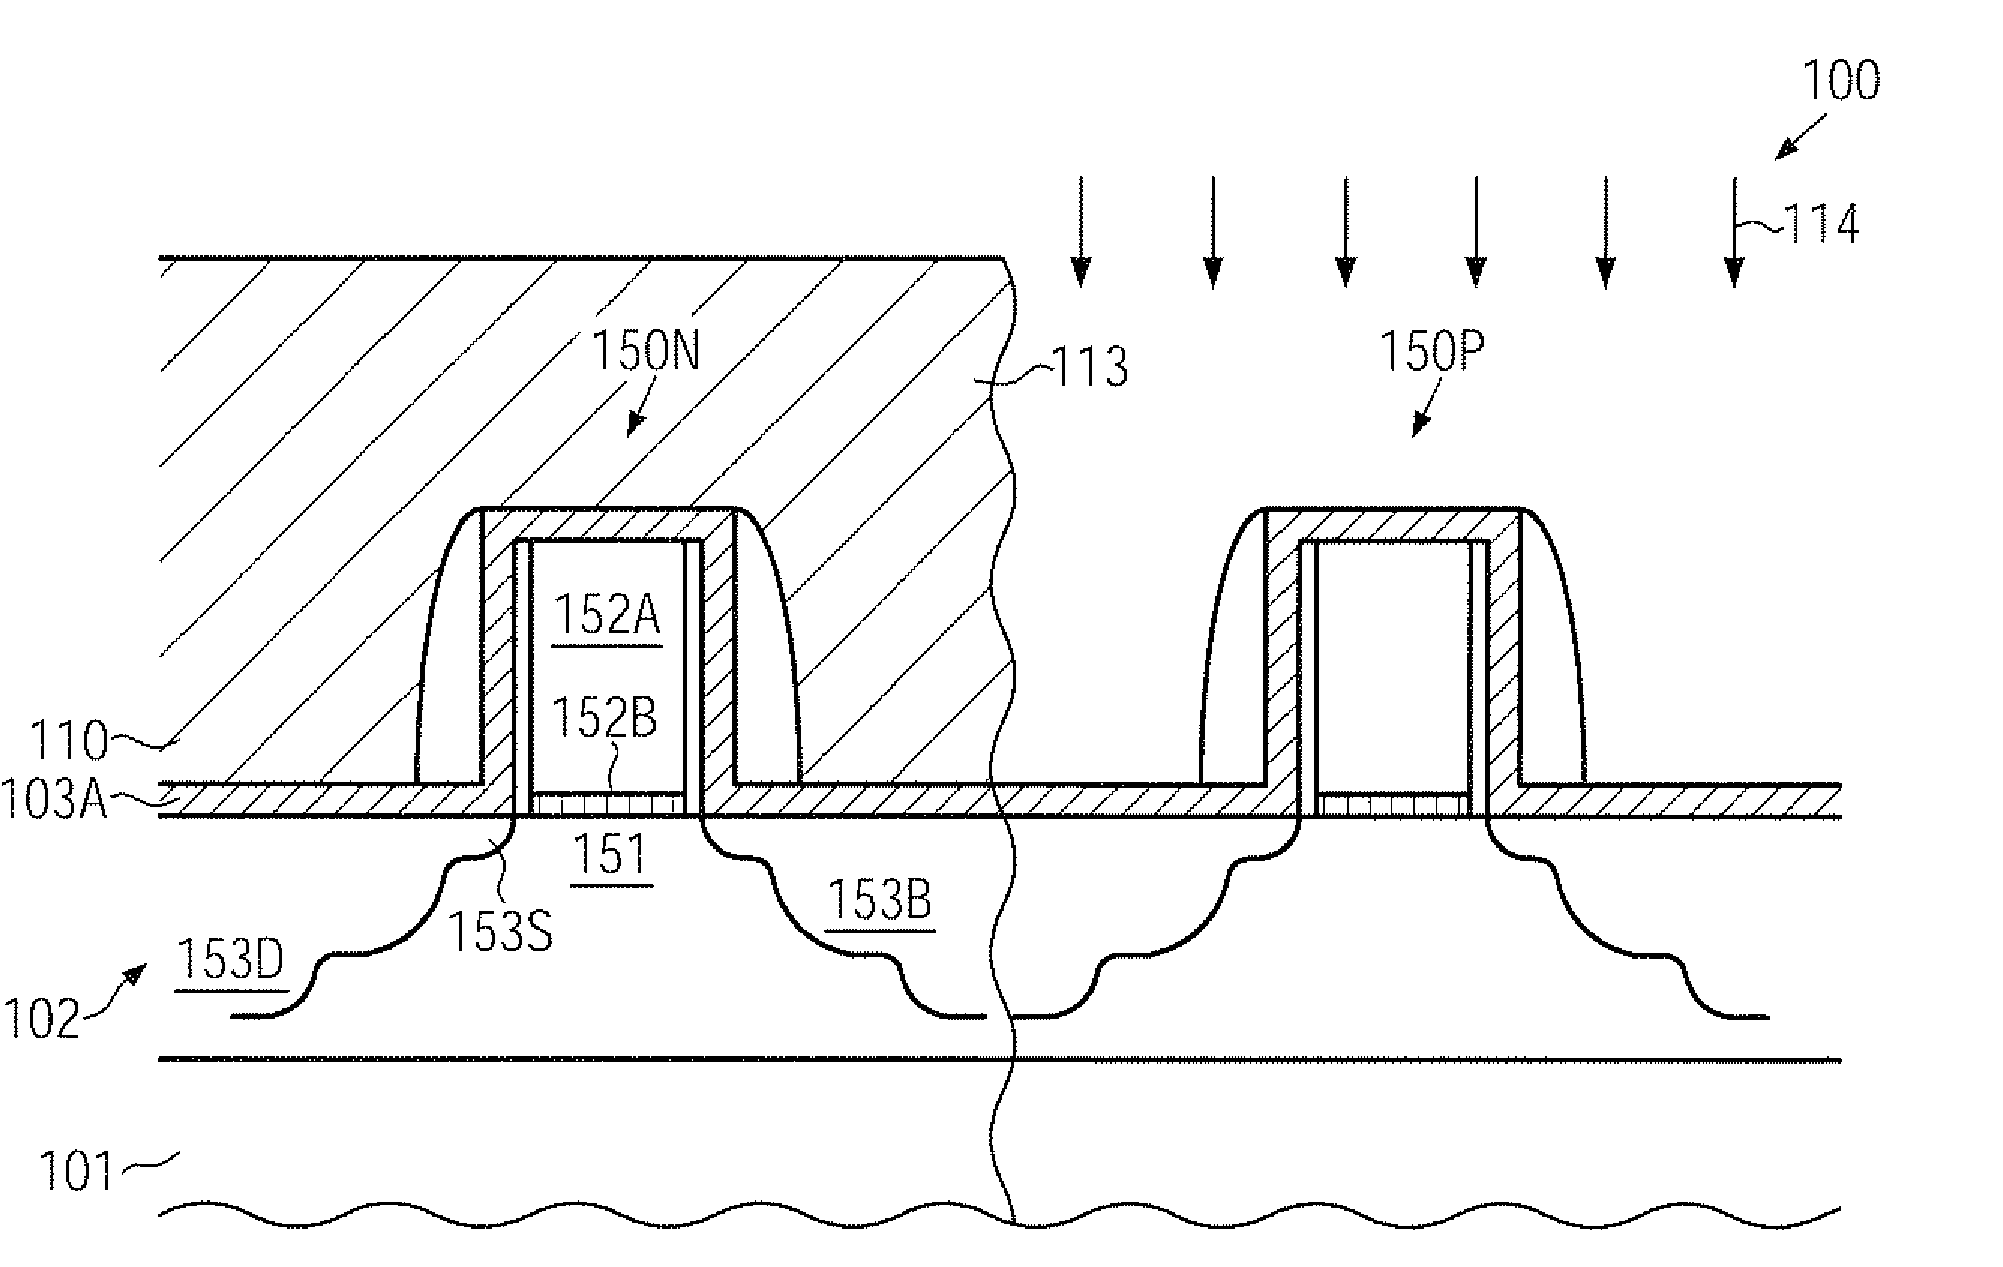 Method for creating tensile strain by applying stress memorization techniques at close proximity to the gate electrode